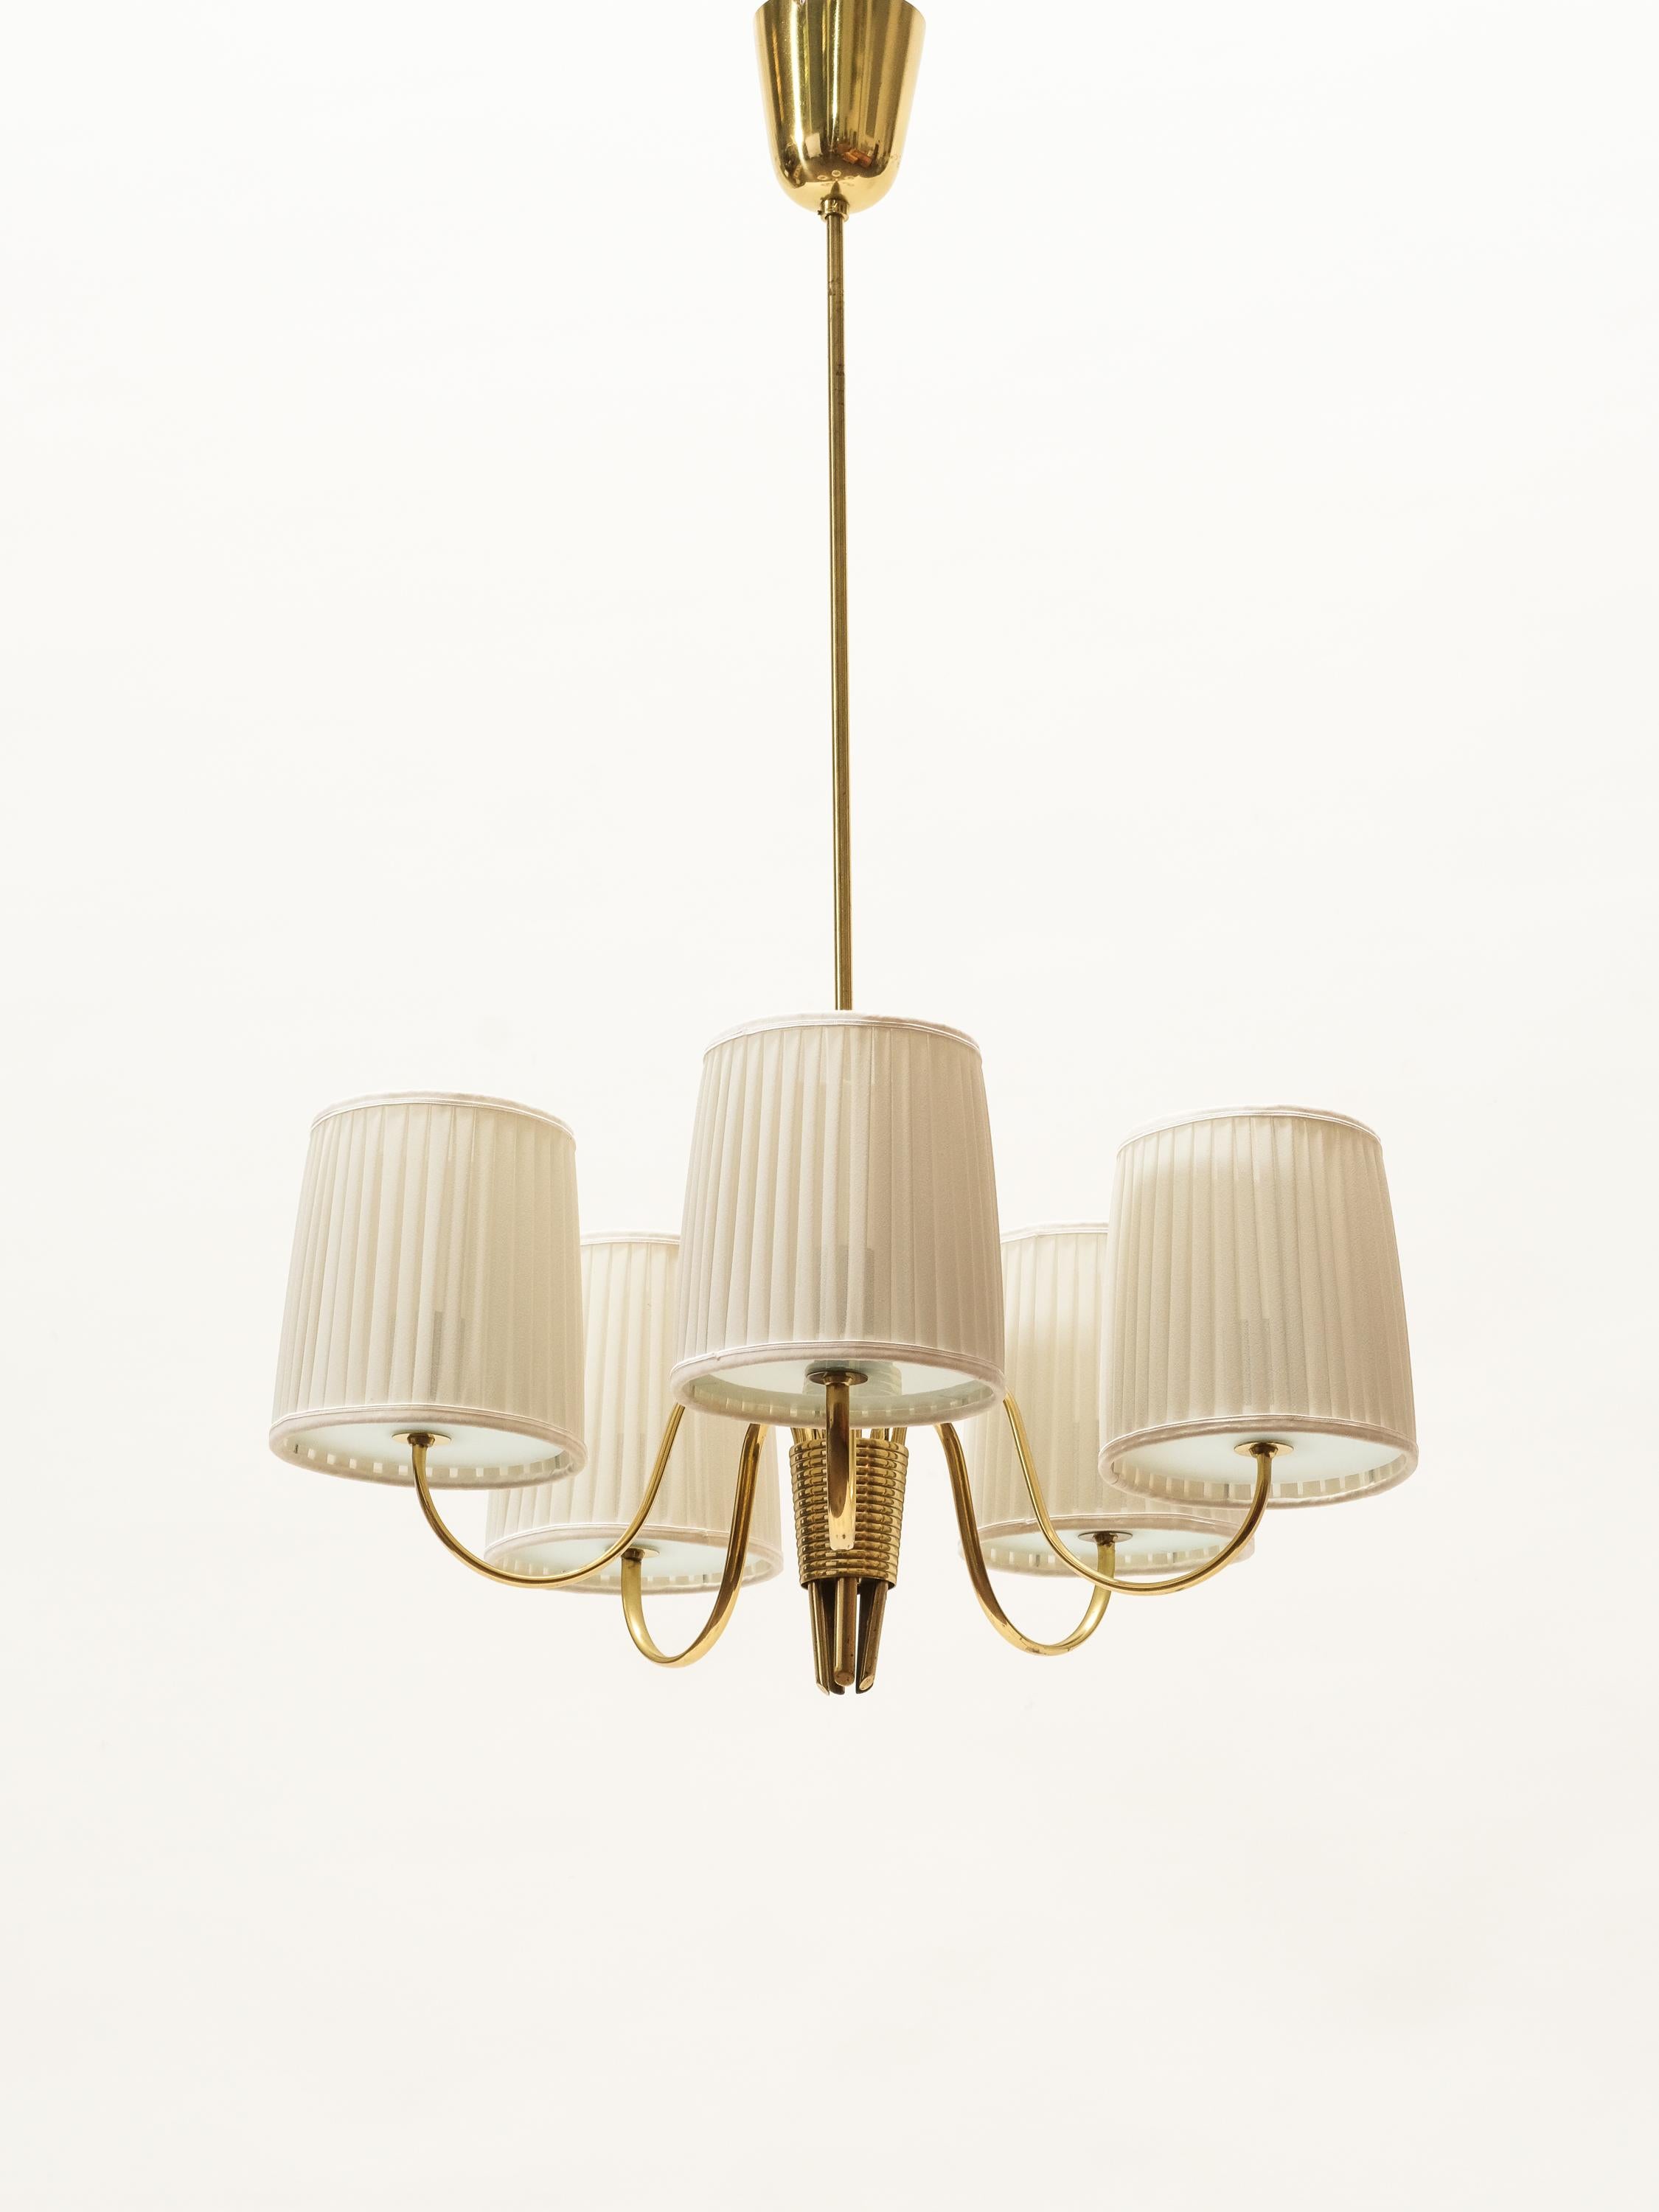 Wonderful and well made five-armed chandelier on a brass frame, frosted glass and new beautiful silk shades.

This is model 9031, designed by Paavo Tynell and made in Finland by Idman.

The lamp has been professionally rewired and in excellent